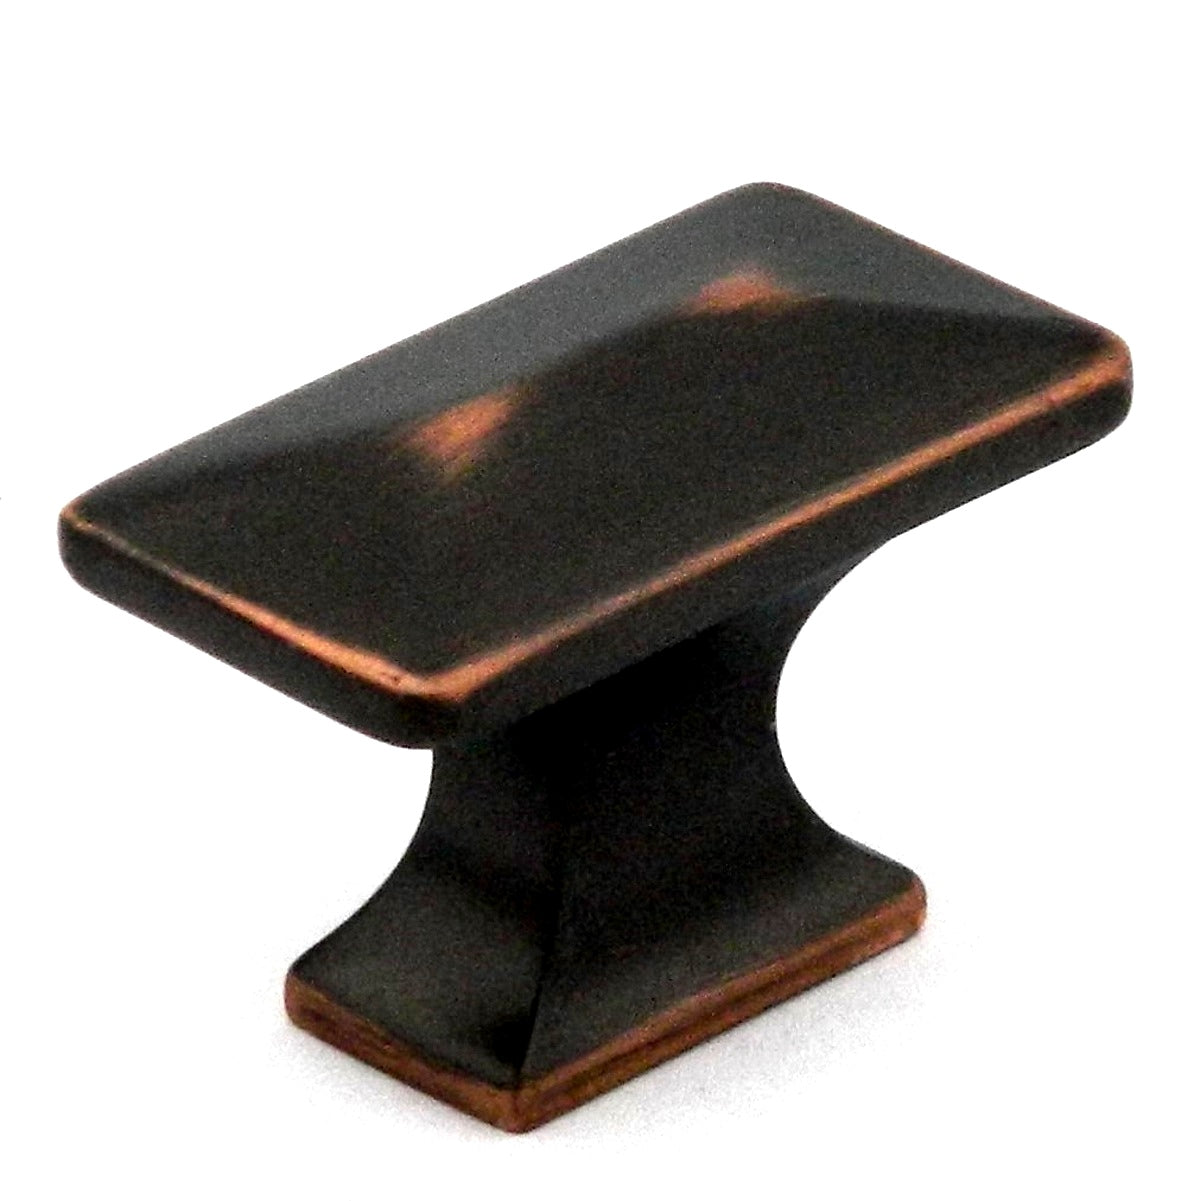 20 Pack Hickory Hardware Bungalow Oil-Rubbed Bronze 1 1/4" Cabinet Knob Pulls P2150-OBH